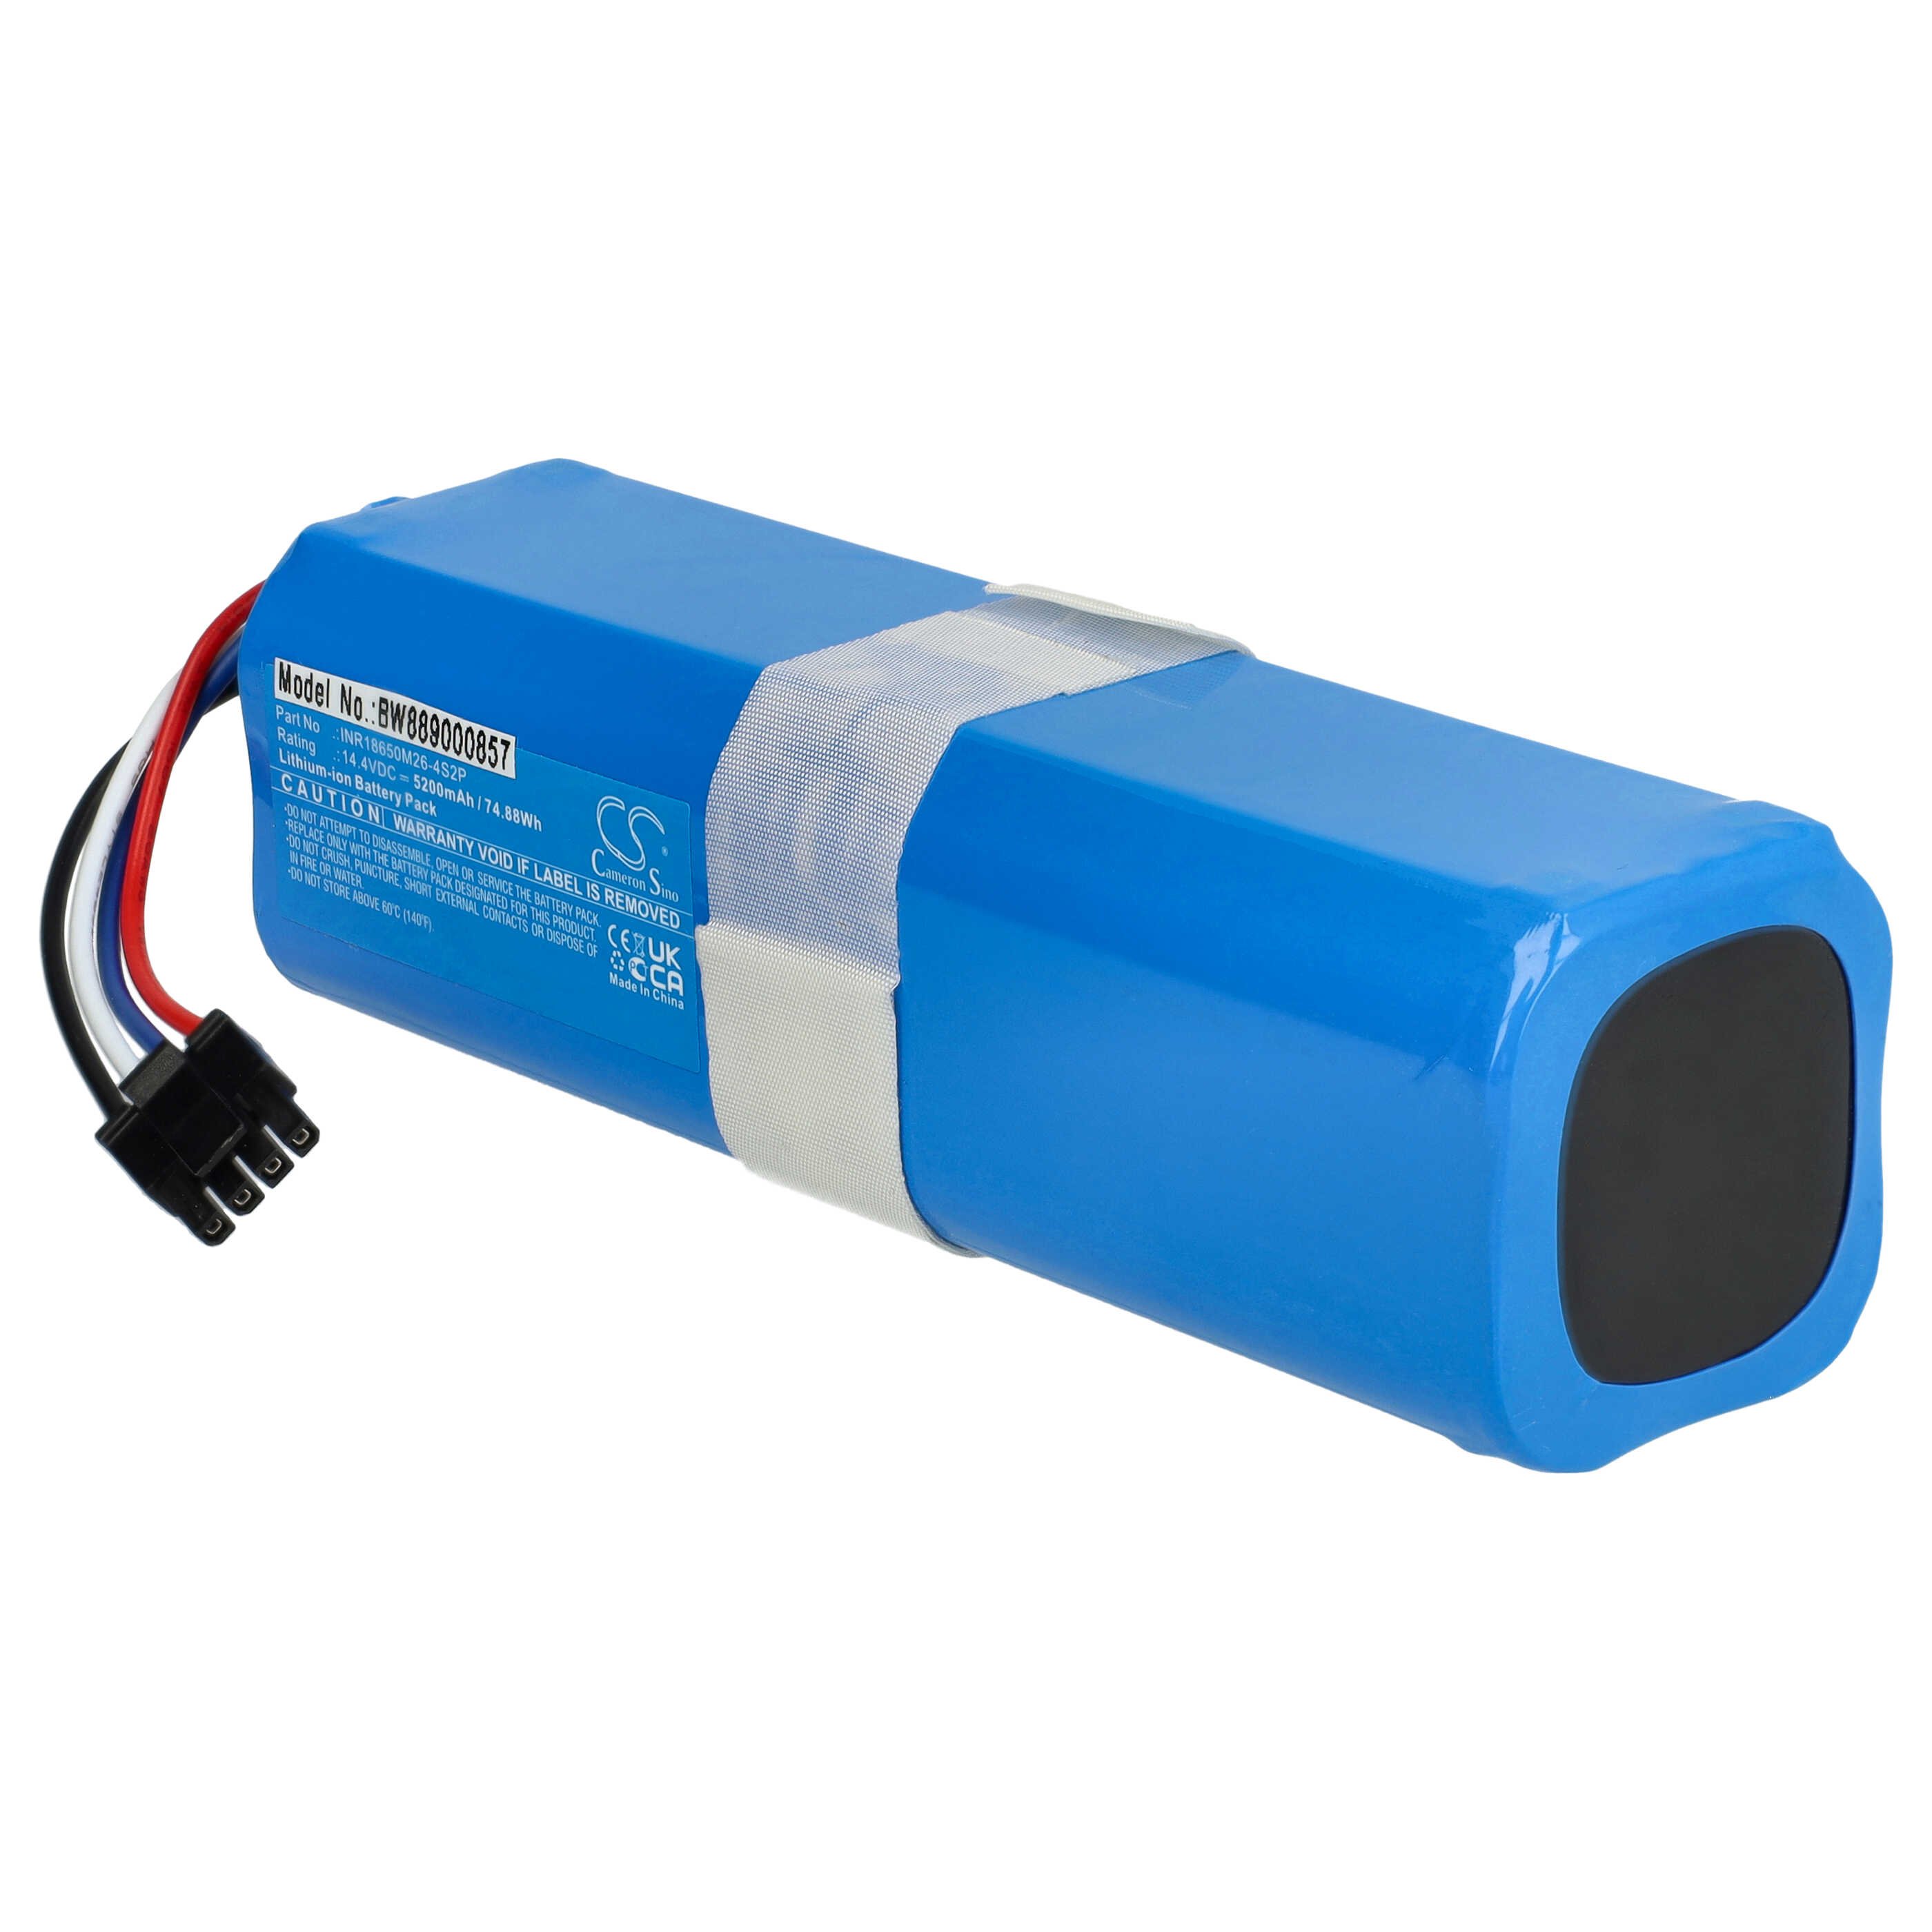 Battery Replacement for 360 INR18650 M26-4S2P, D080-4S2P for - 5200mAh, 14.4V, Li-Ion